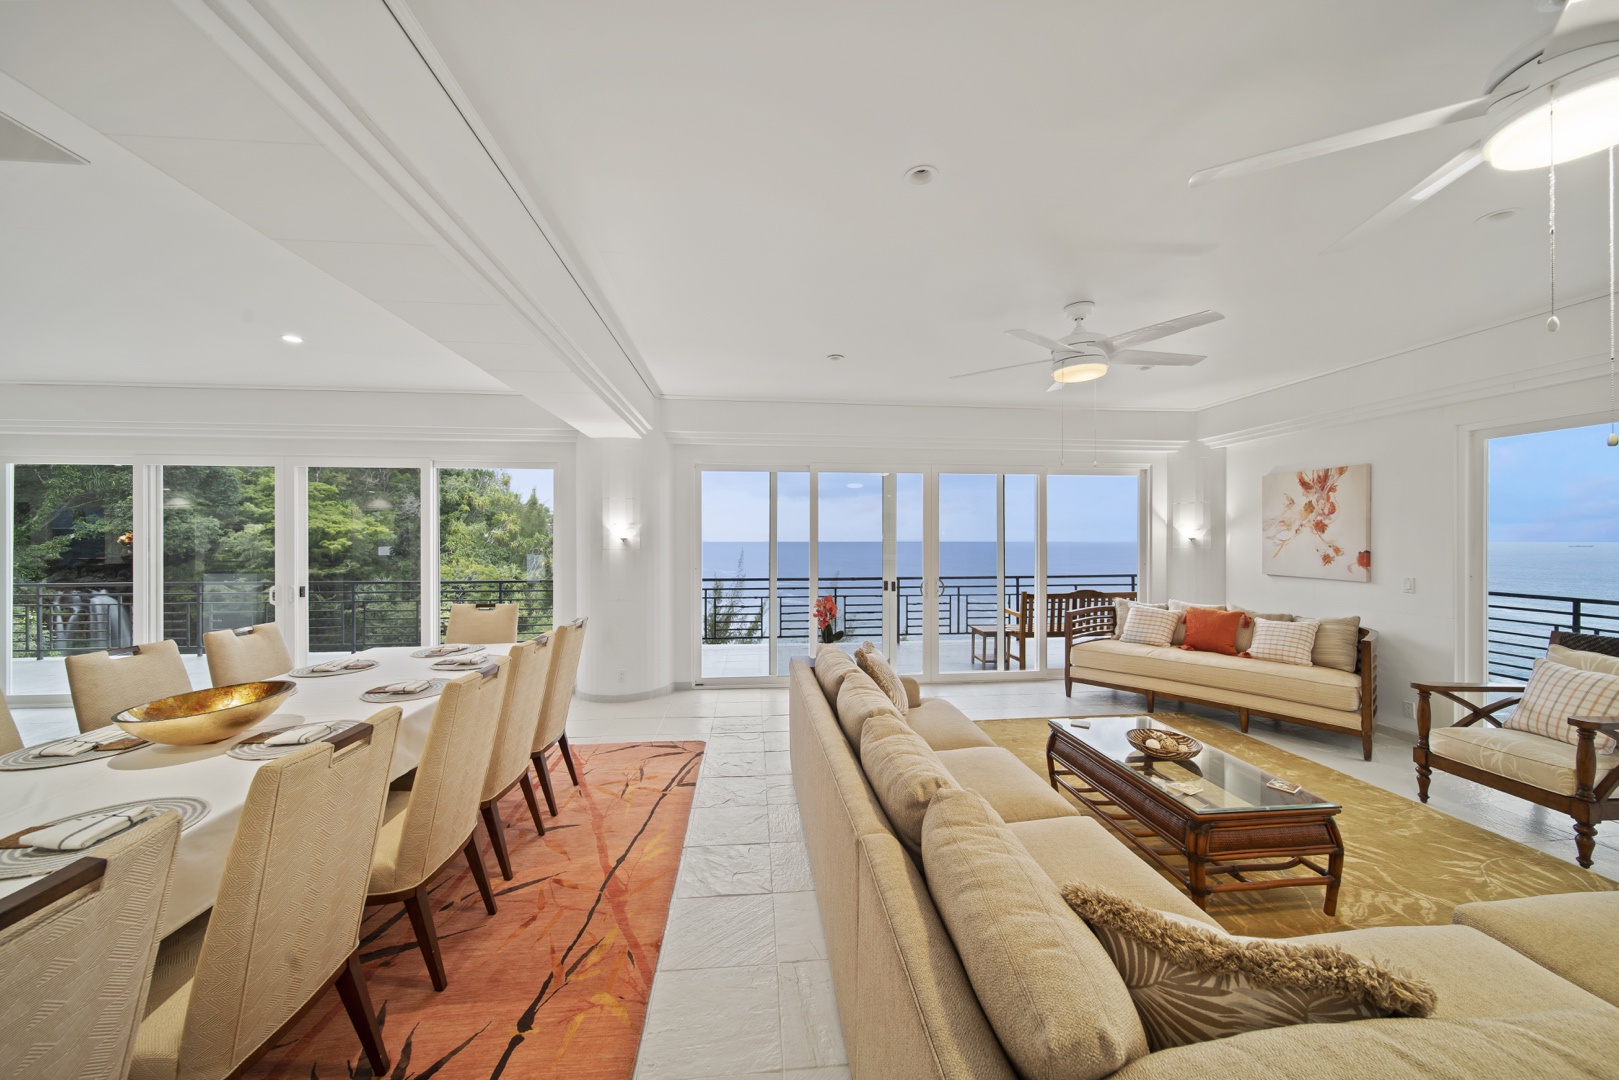 Ninole Vacation Rentals, Waterfalling Estate - Great room with ample plush seating, wrap around deck and ocean views.